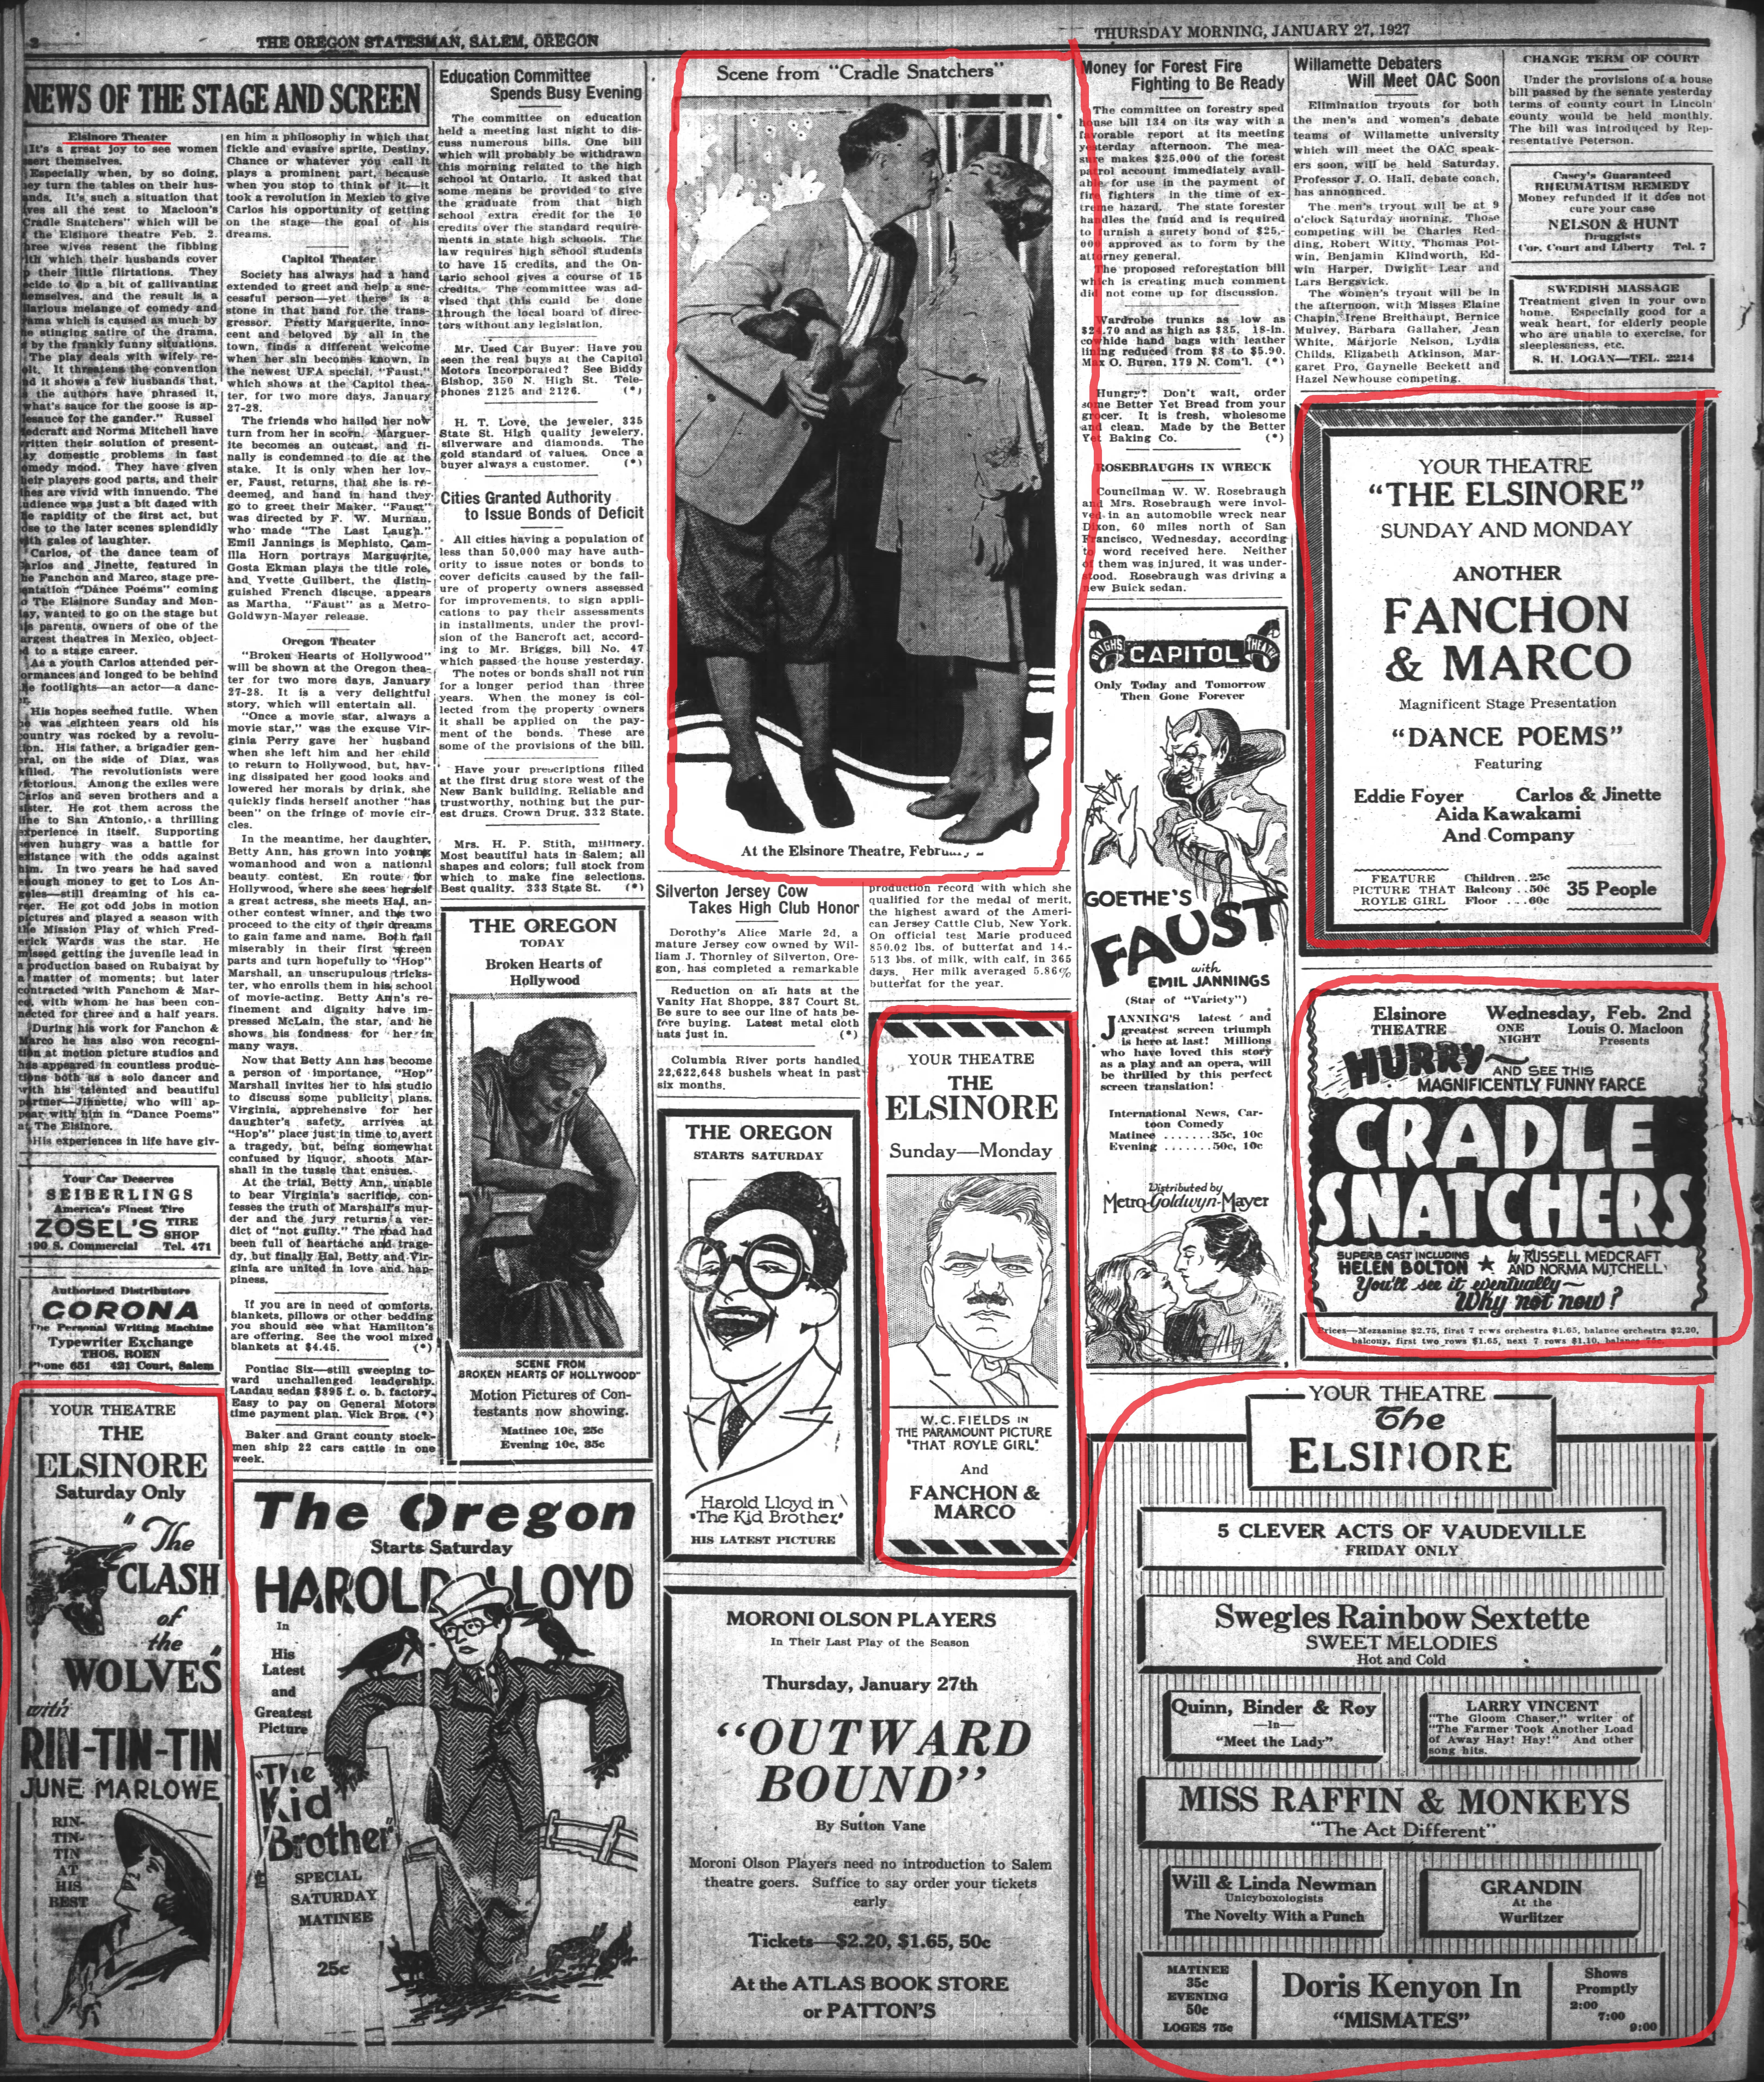 Full page newspaper spread of Elsinore advertisements, 1927